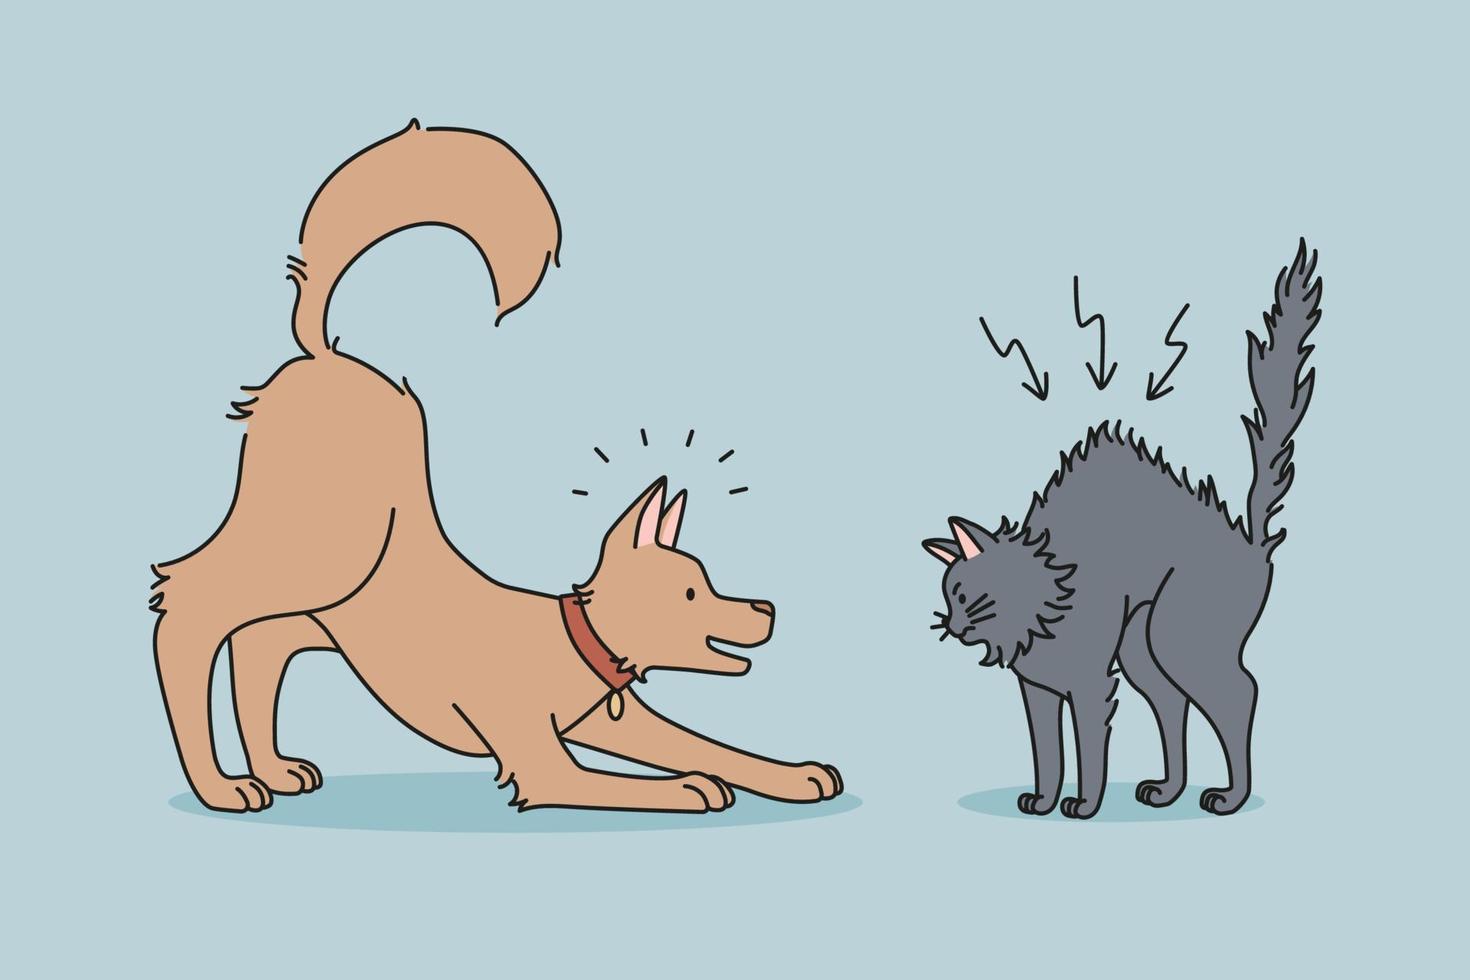 Angry cat and dog fight at home. Playful puppy and mad kitten battle feeling aggressive. Domestic animals daily life. Pets playing together. Flat vector illustration, cartoon character.